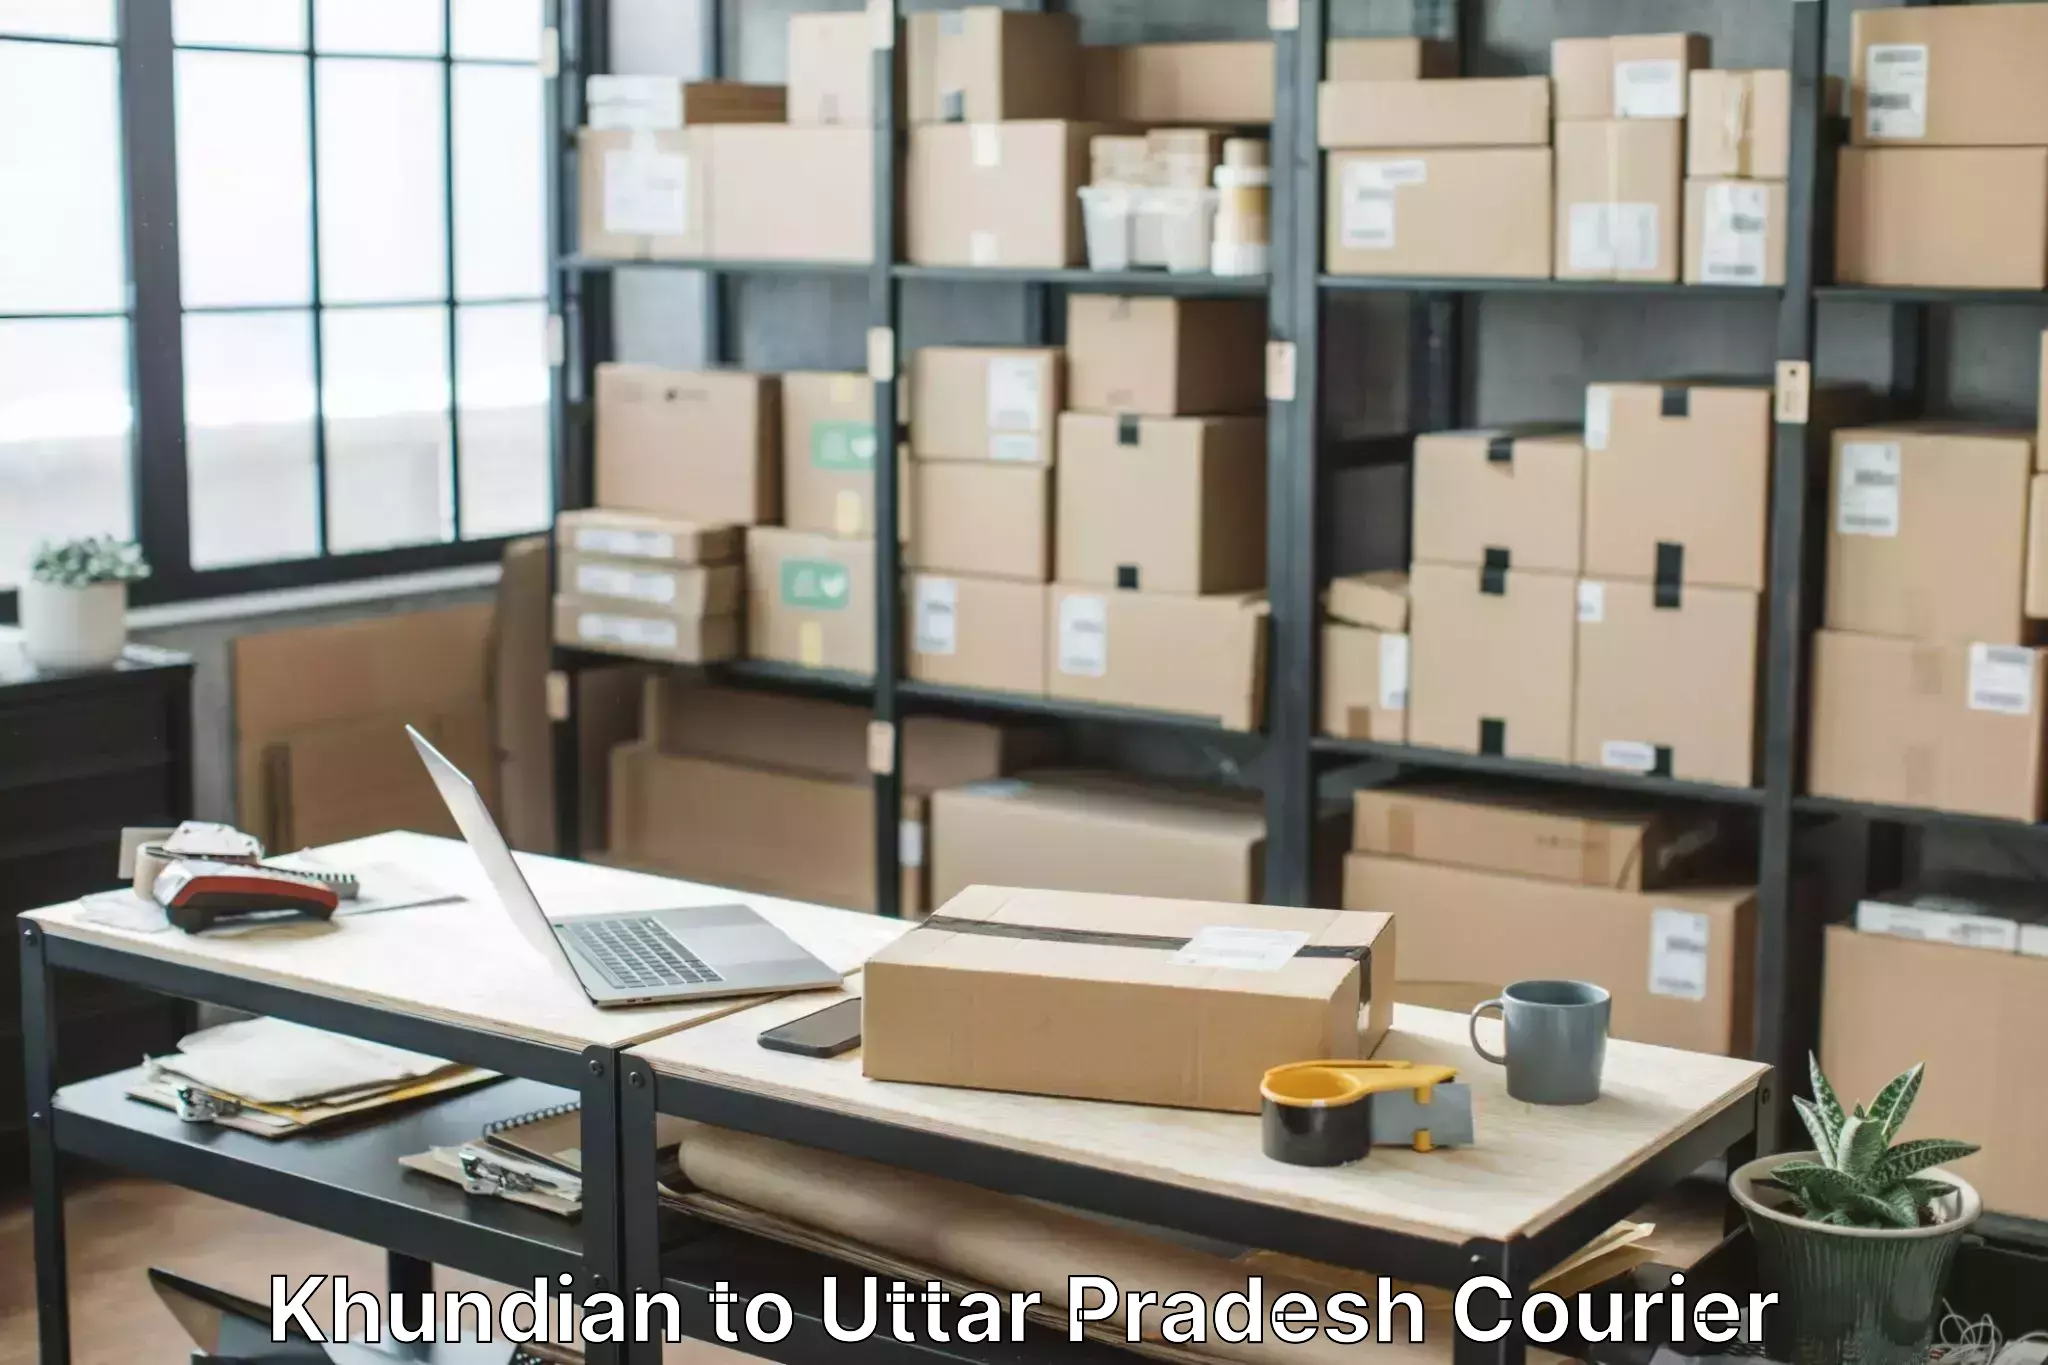 Comprehensive relocation services in Khundian to Fatehabad Agra